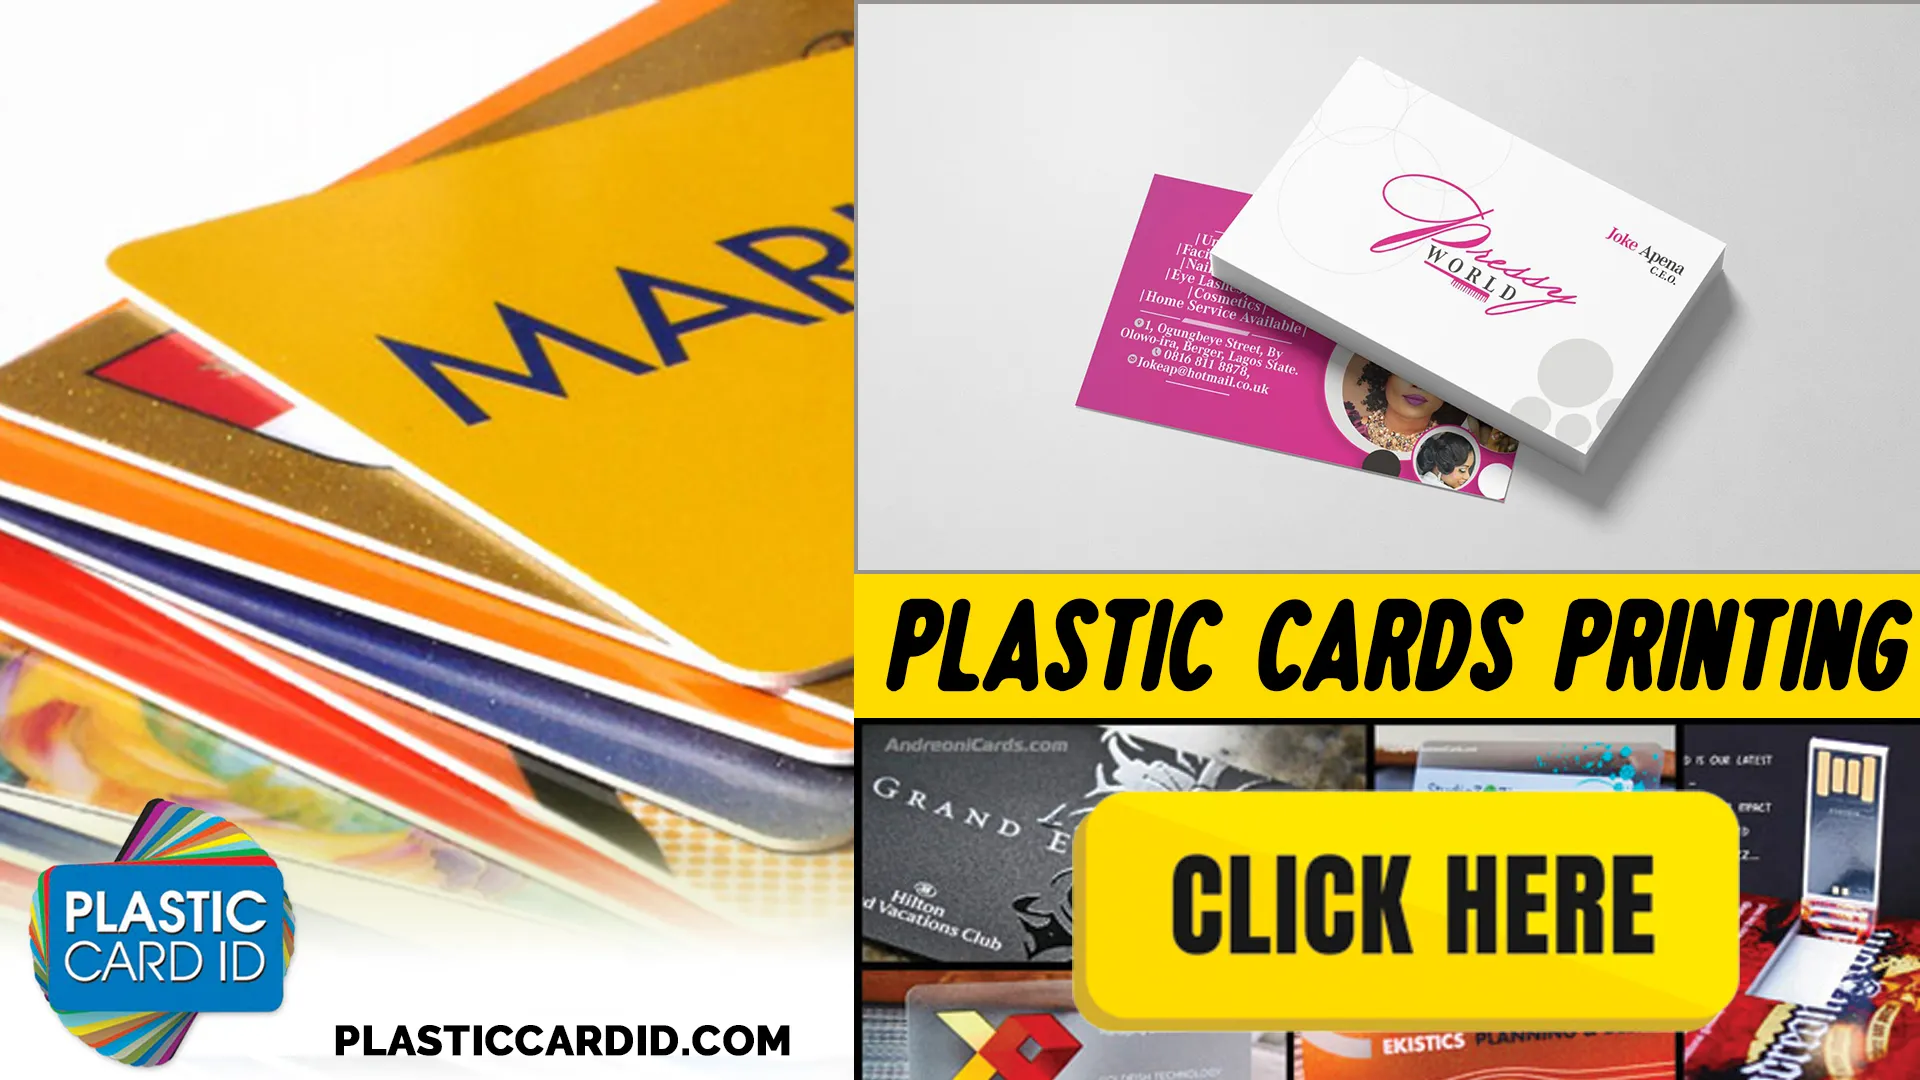 Explore the Spectrum of Customizable Card Options at Plastic Card ID




